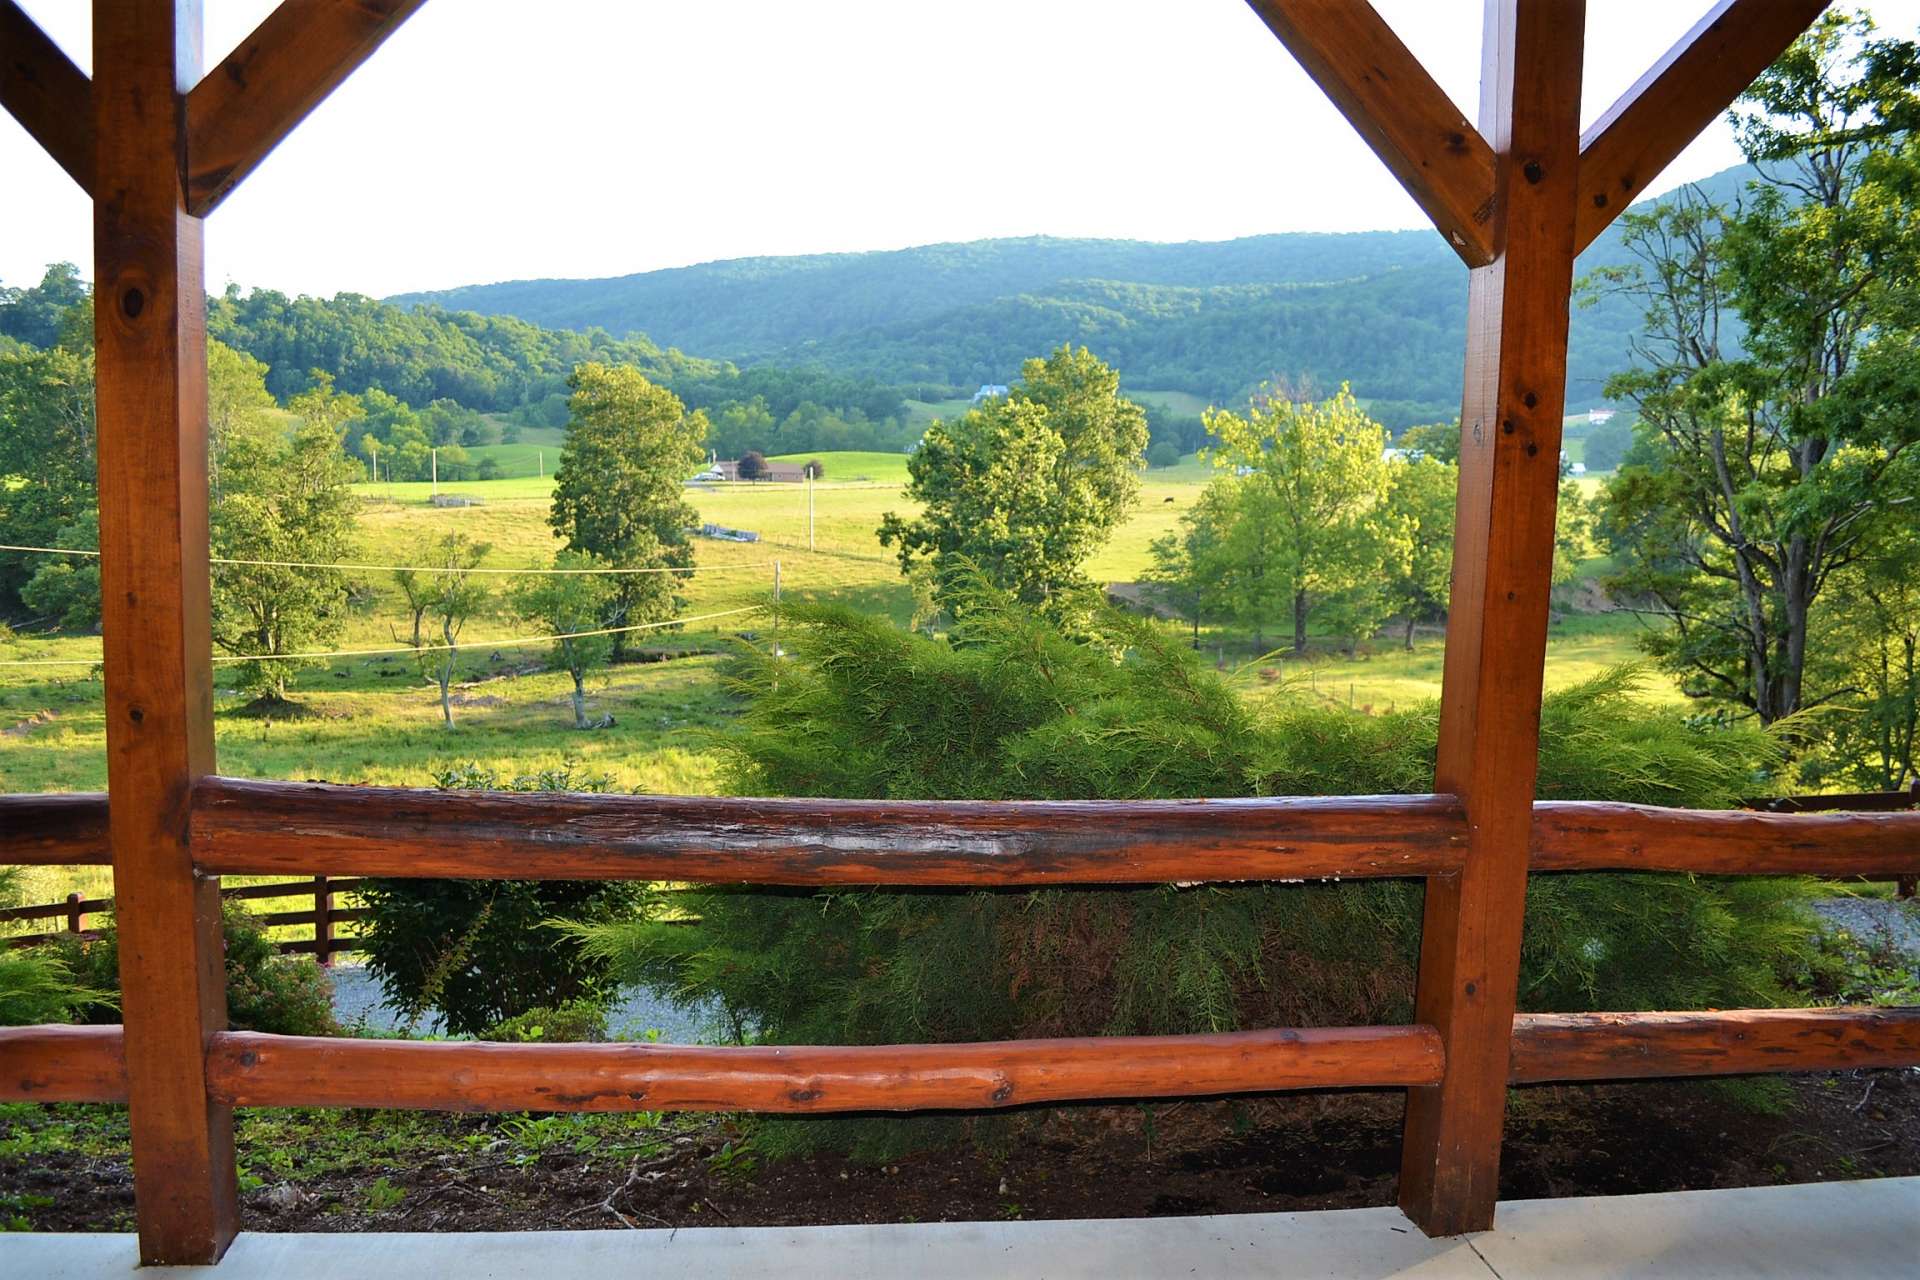 The full length covered front porch is the ideal location to enjoy a tall glass of iced tea while savoring the lush pastoral views with the Blue Ridge Mountains as a backdrop.